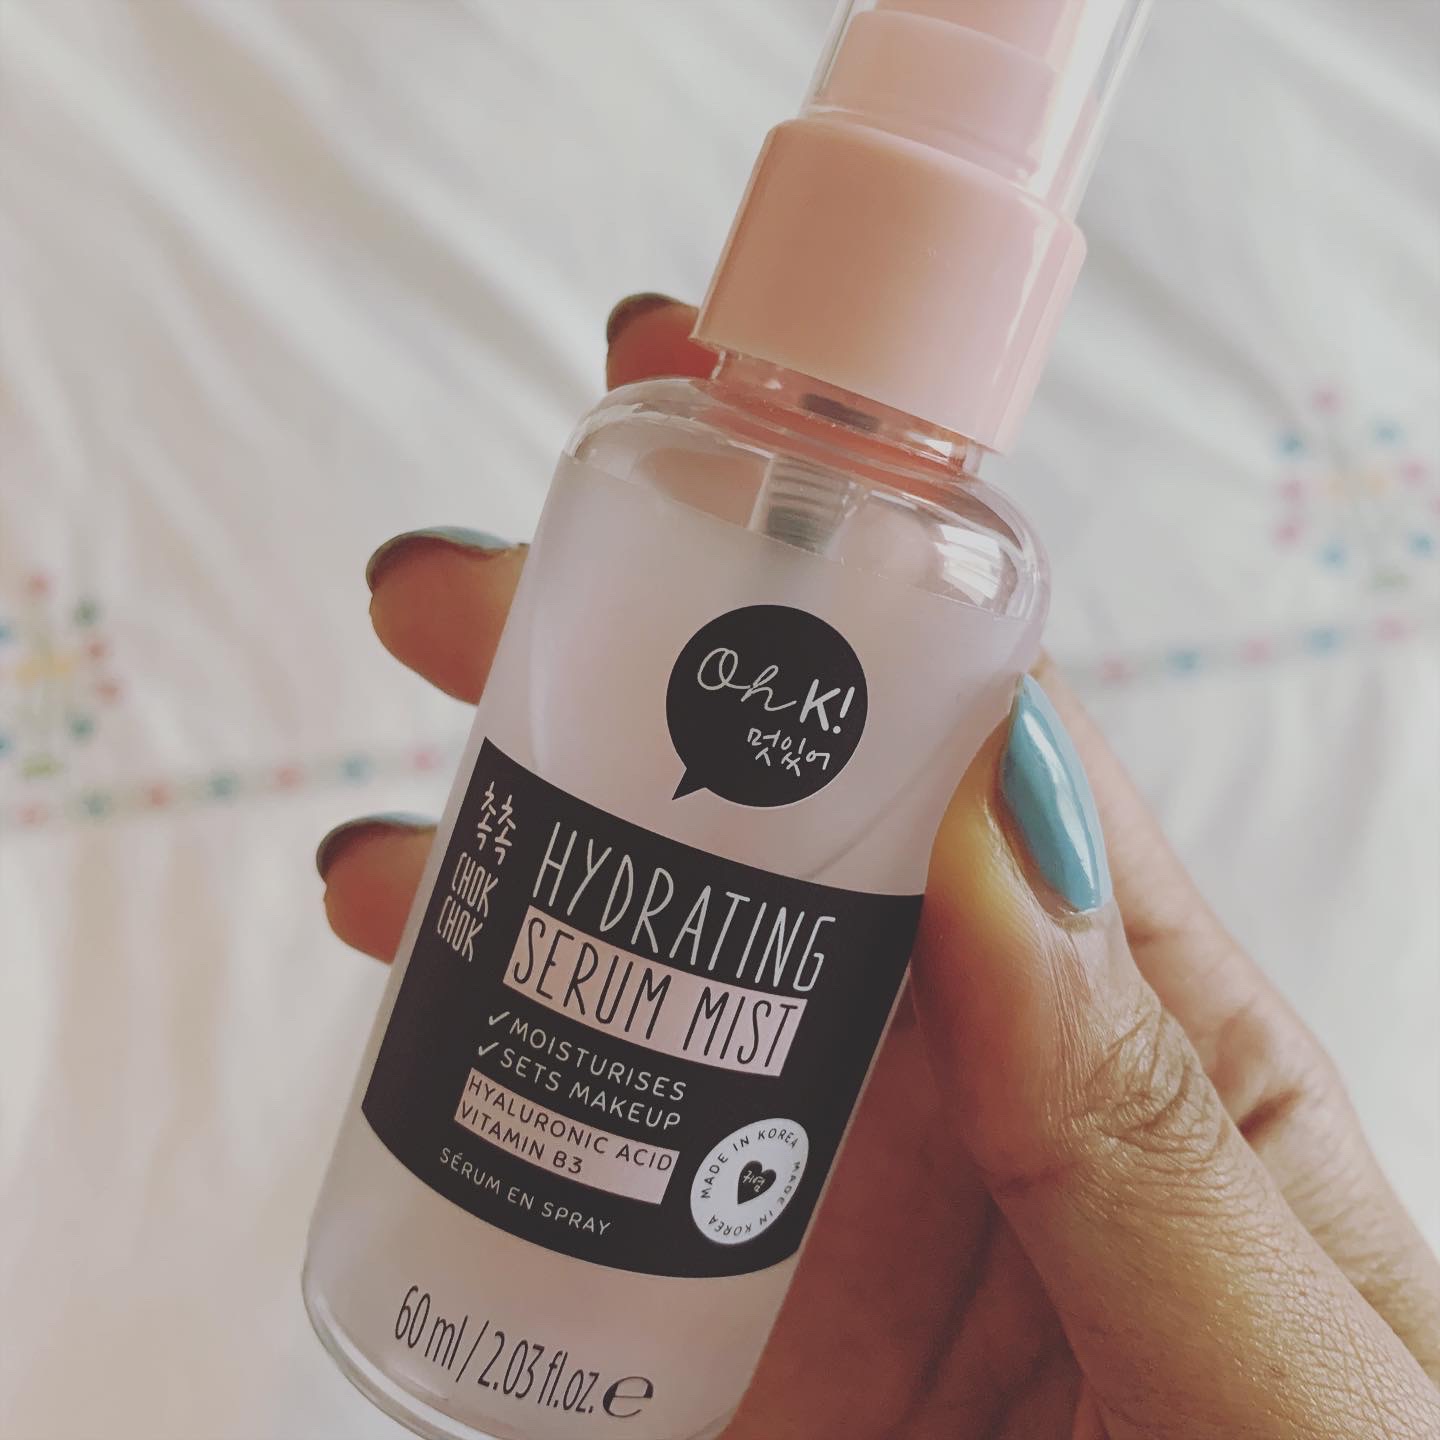 Oh K! Hydrating Serum Mist Review | Canadian Beauty